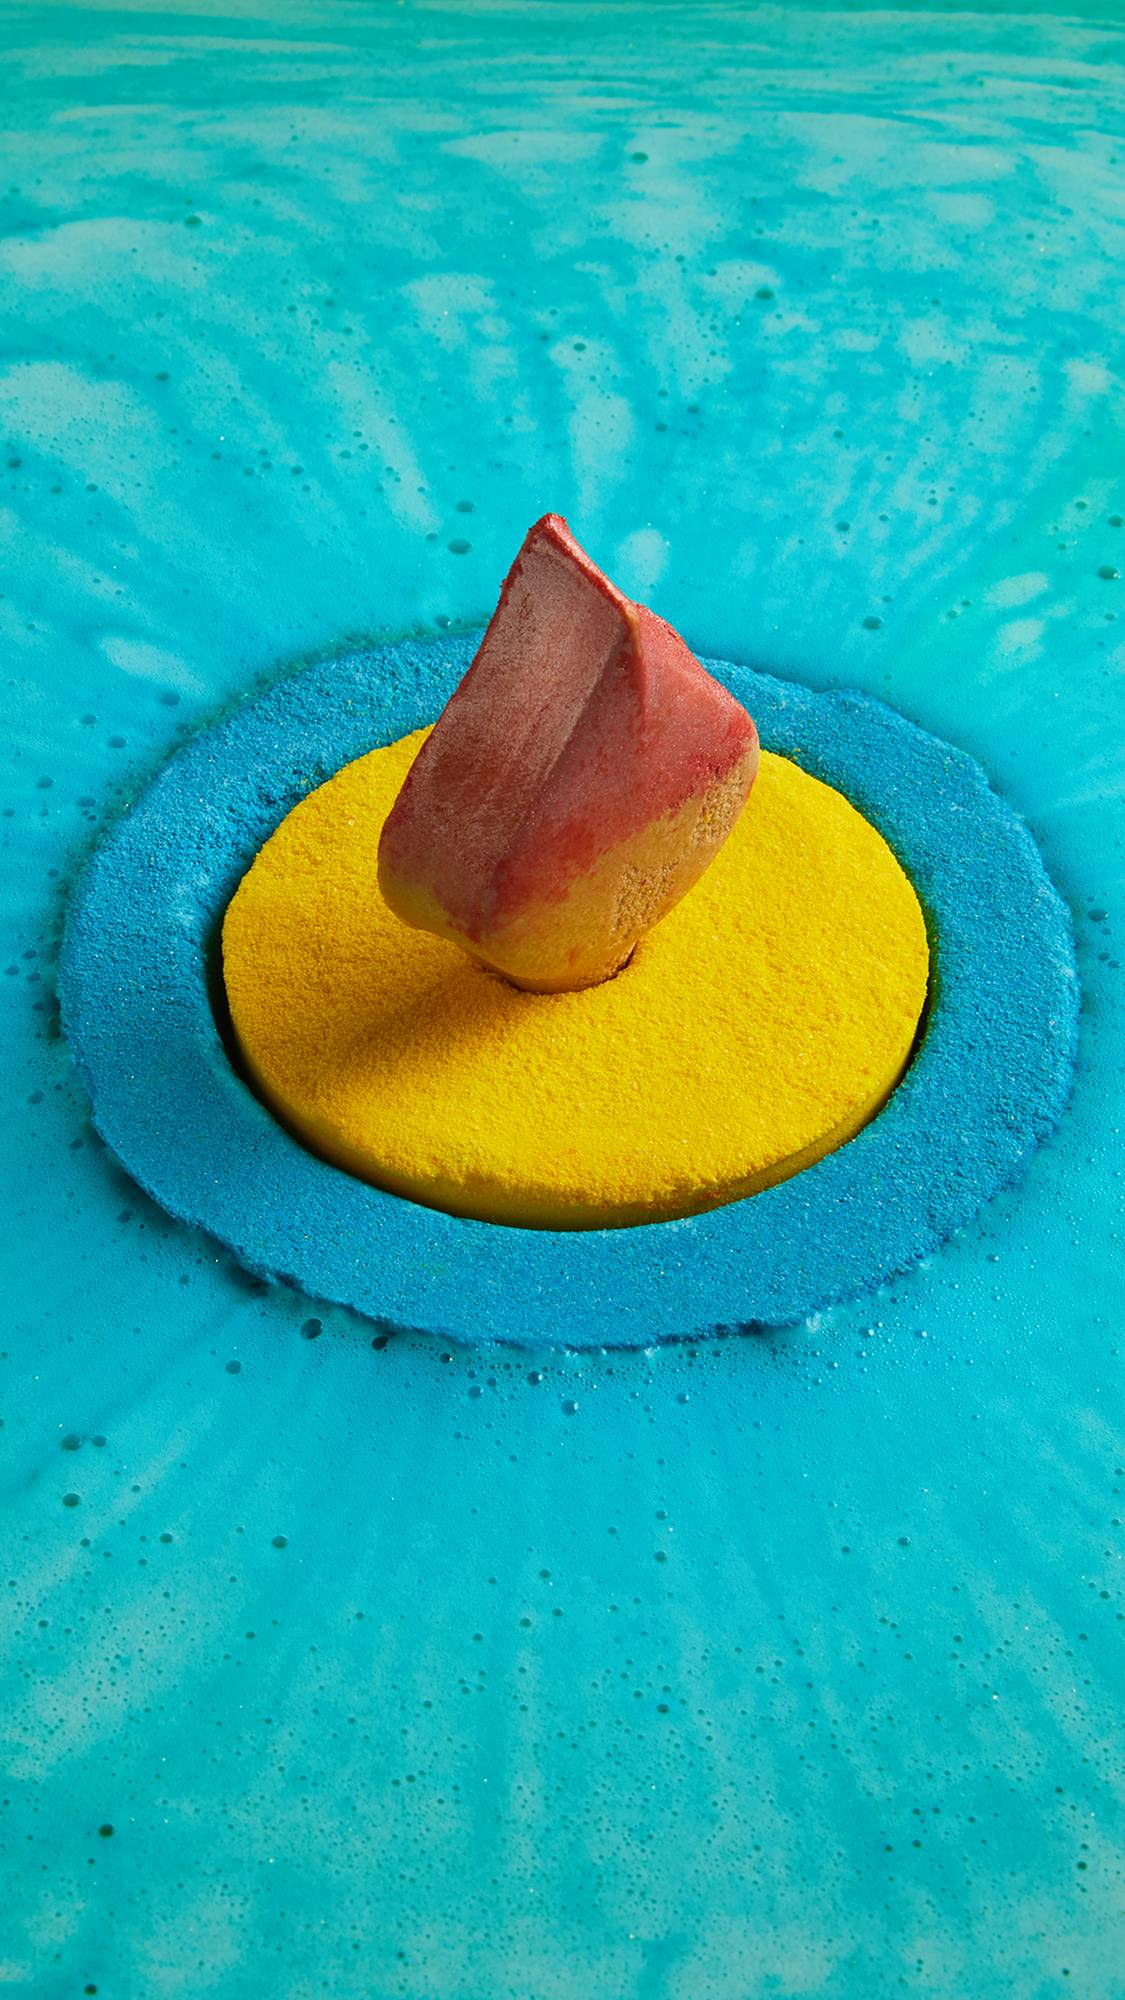 Diya bath bomb floats atop the water surrounded by vivid blue foam. The yellow centre and solid oil flame are still intact.